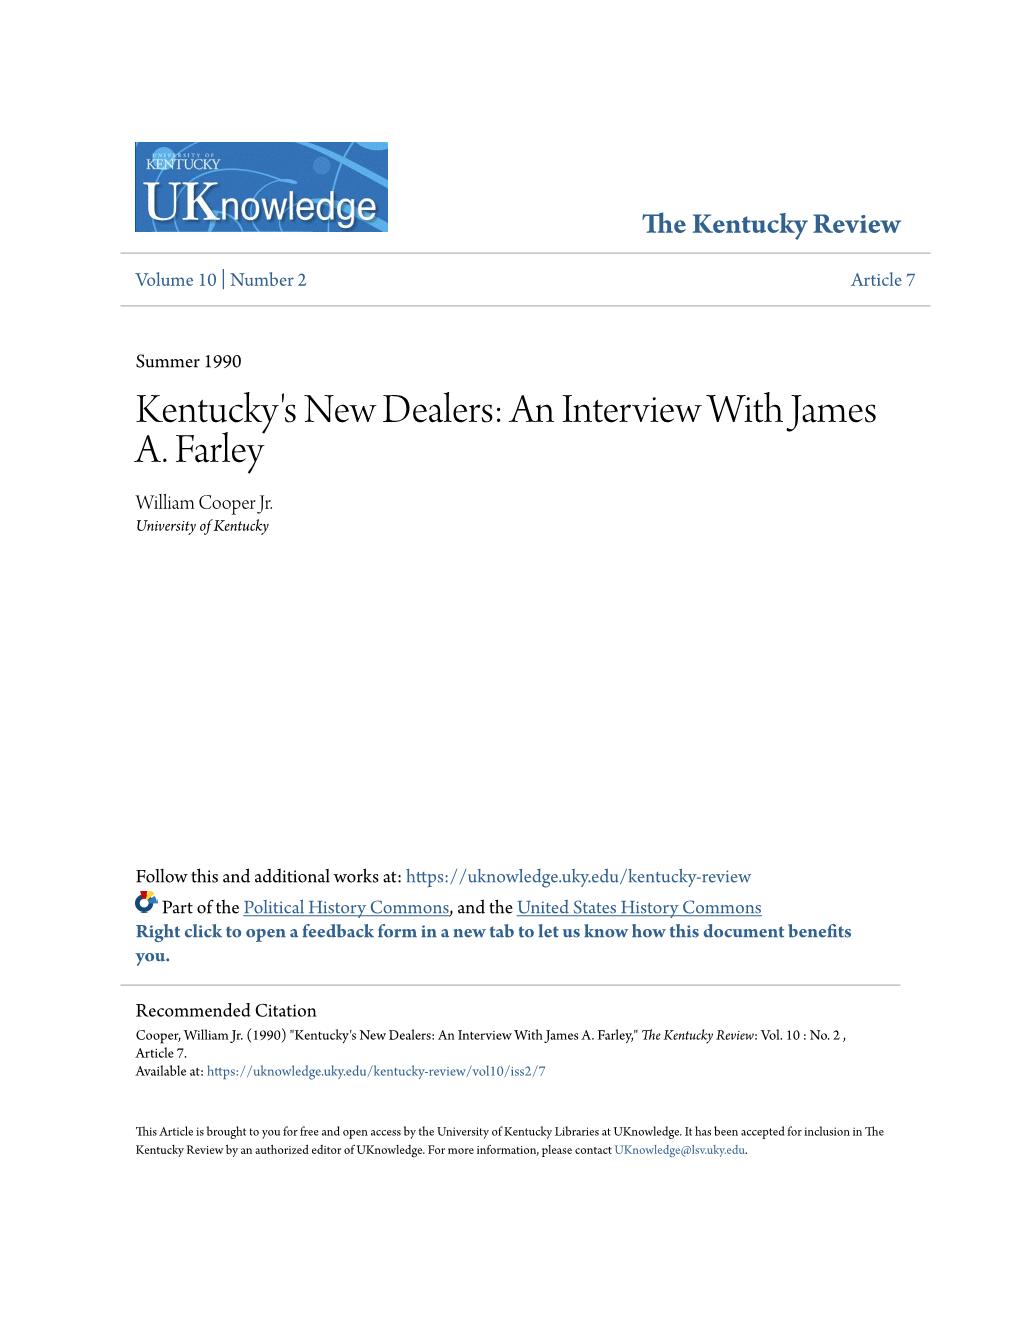 An Interview with James A. Farley William Cooper Jr